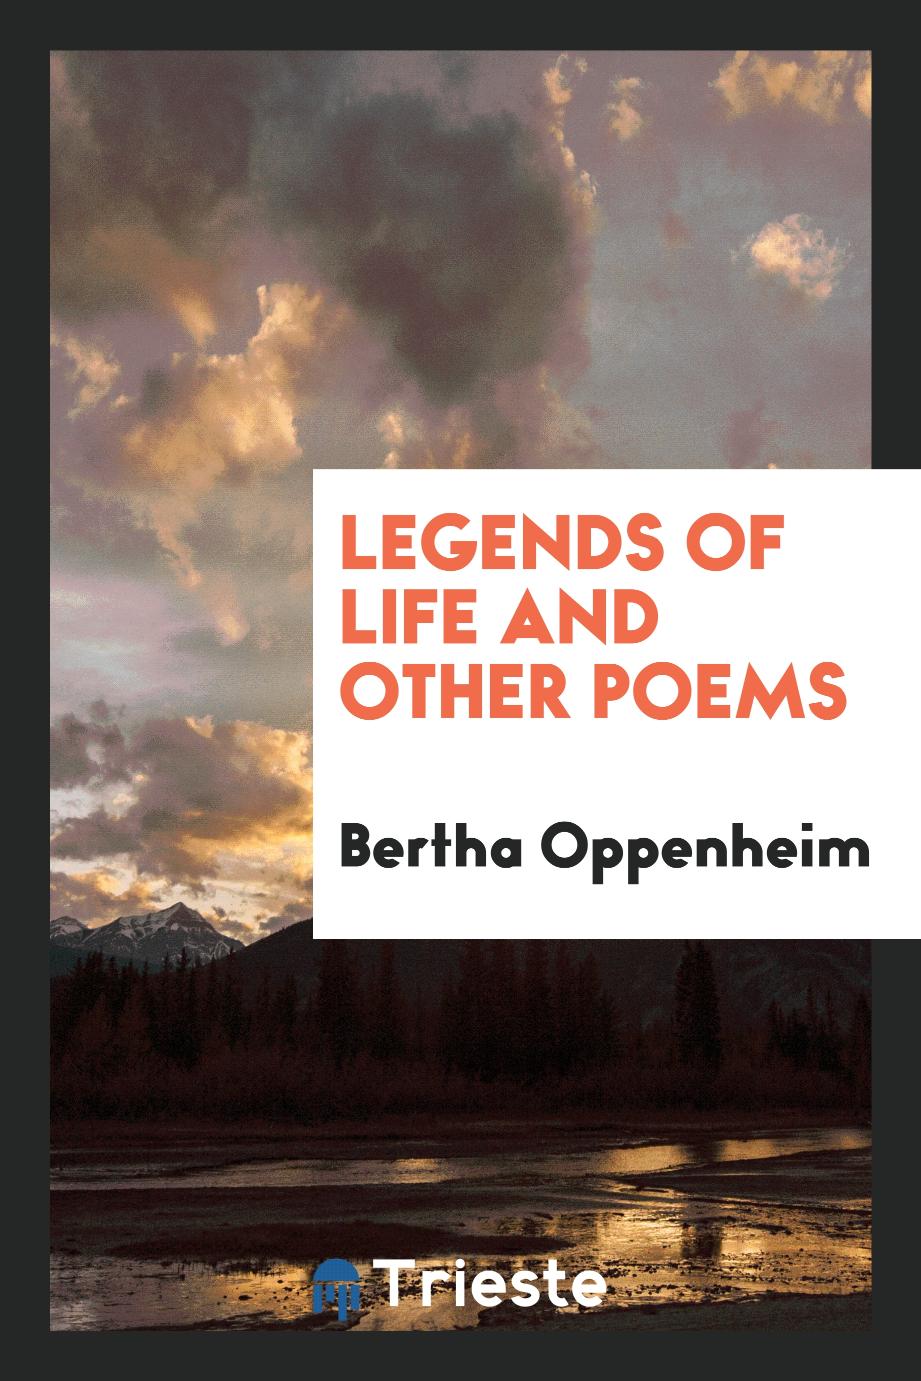 Legends of Life and Other Poems